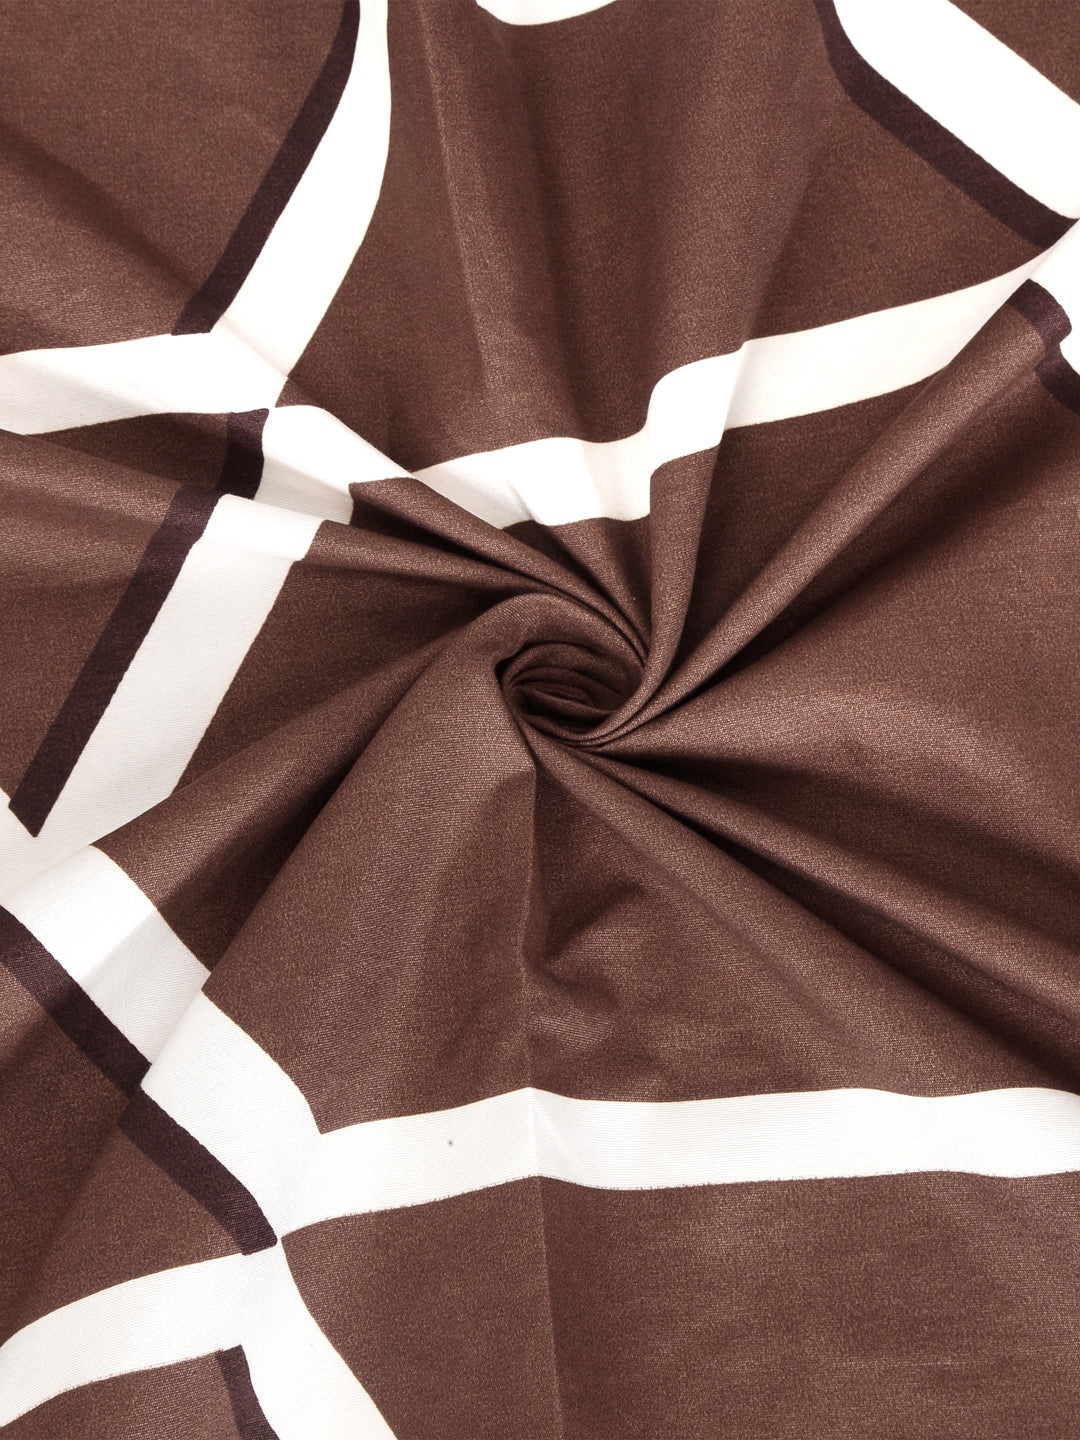 Klotthe Brown Geometric Cotton Blend Single Bedsheet with Pillow cover